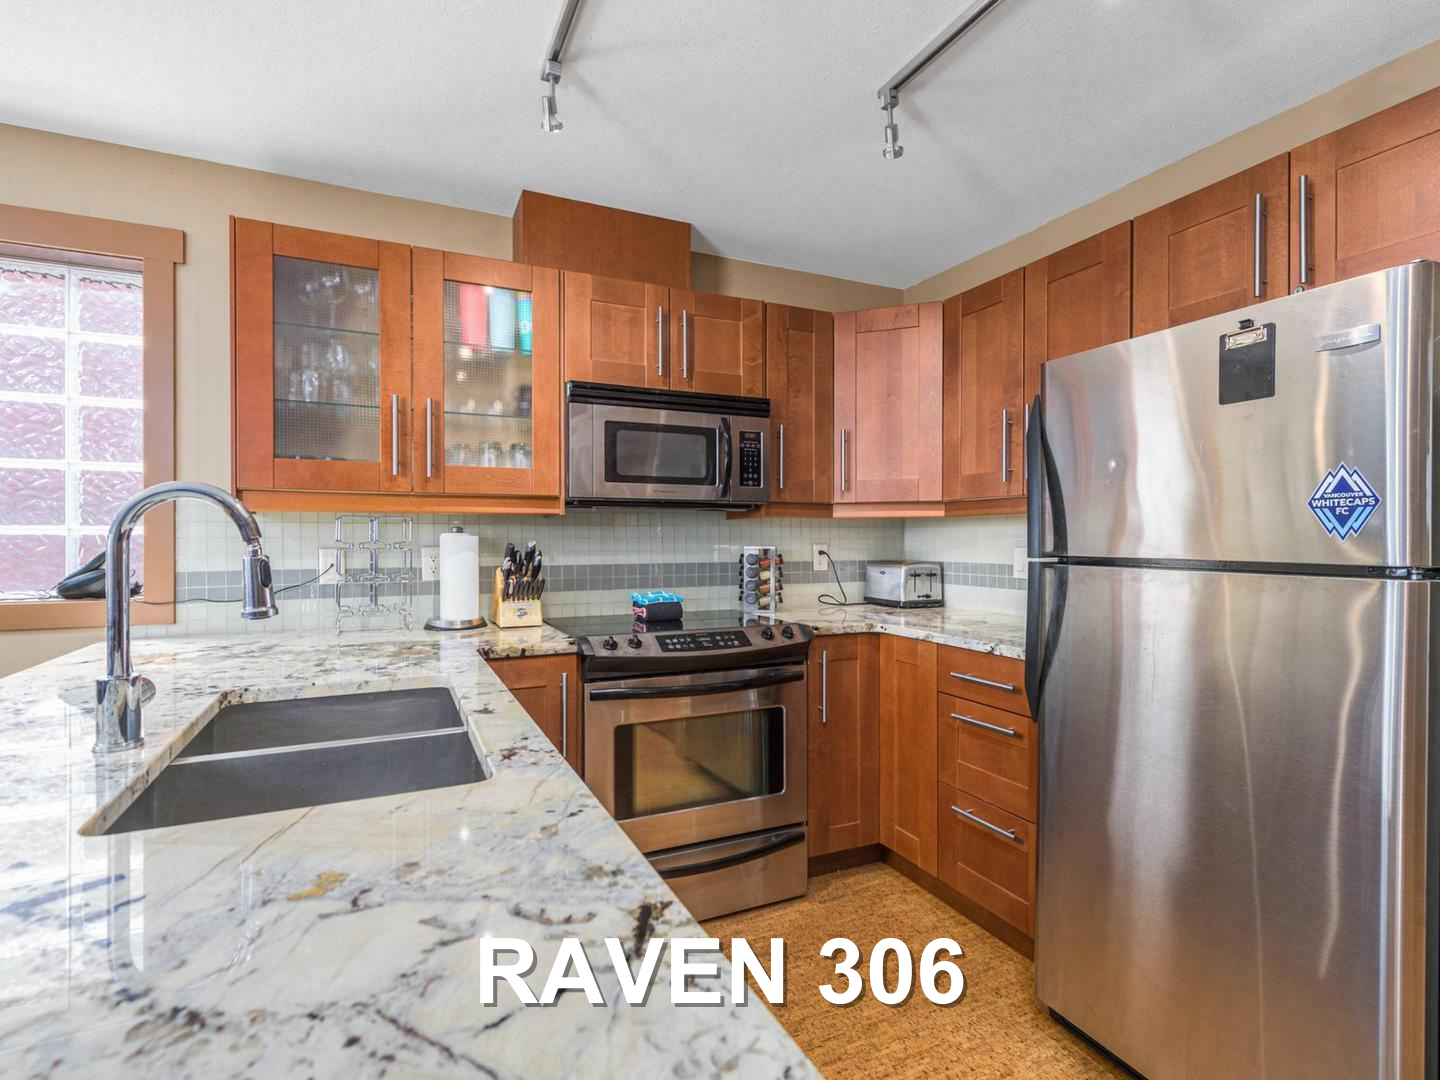 The Raven 306 gourmet kitchen, which is fully equipped with stainless steel appliances, and has wooden cabinets and white marble countertops, located at Big White Ski Resort and managed by Luxury Mountain Vacation Rentals.